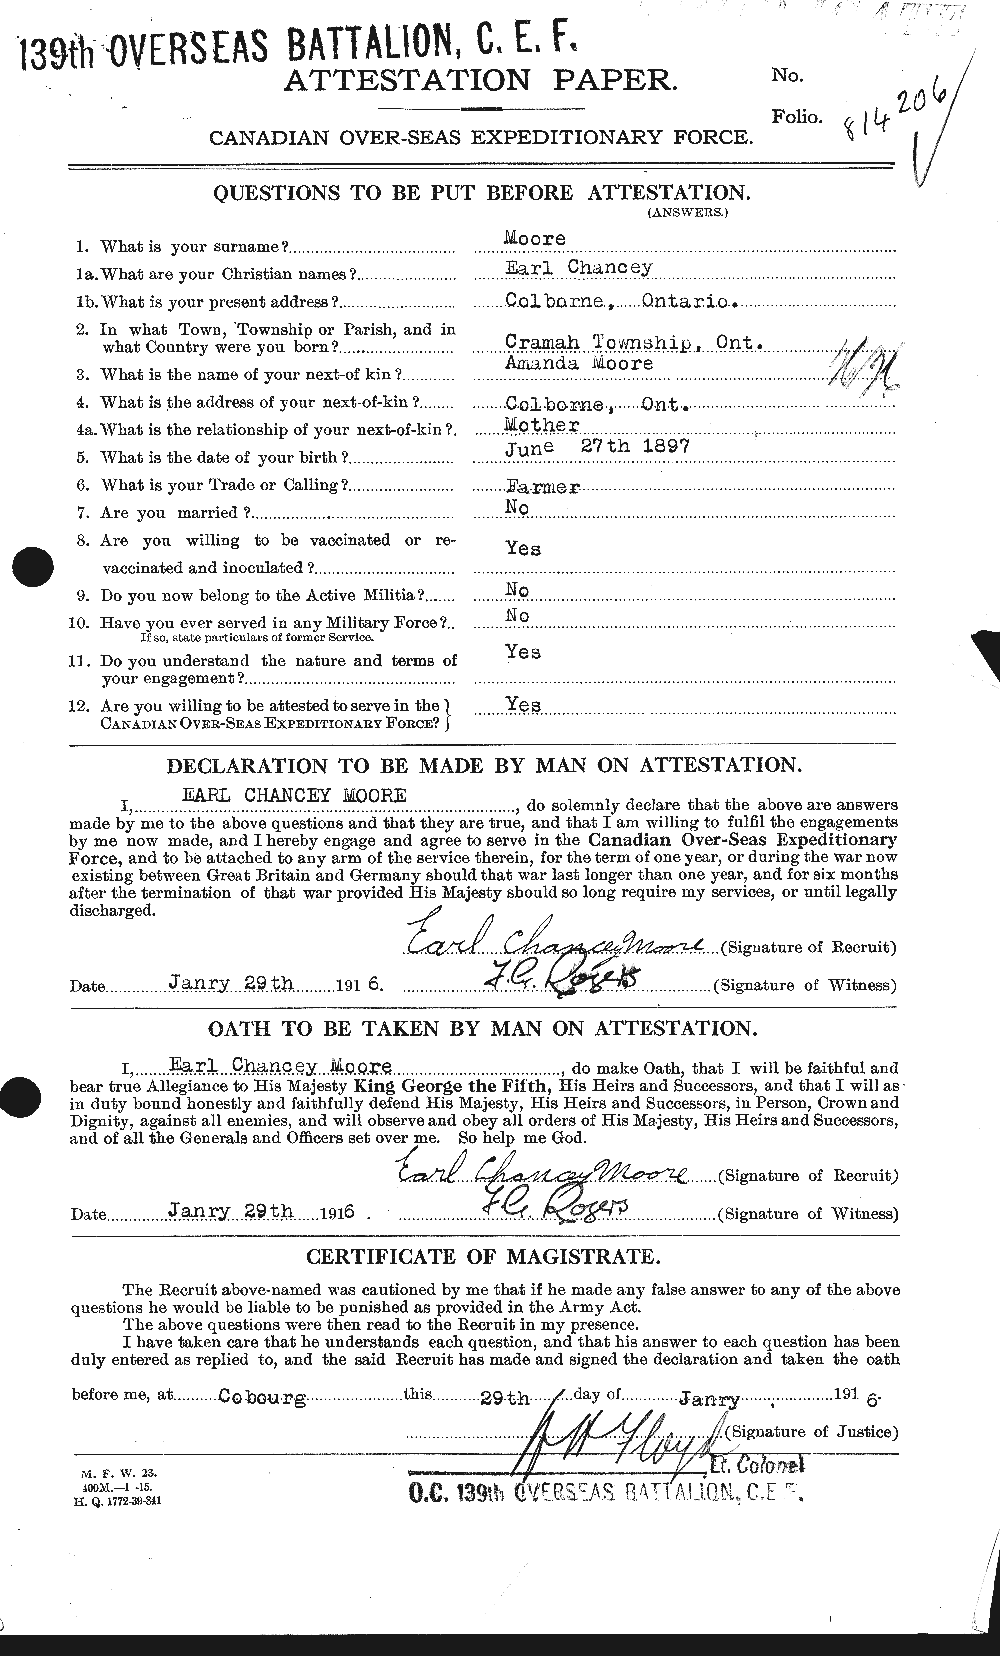 Personnel Records of the First World War - CEF 506597a